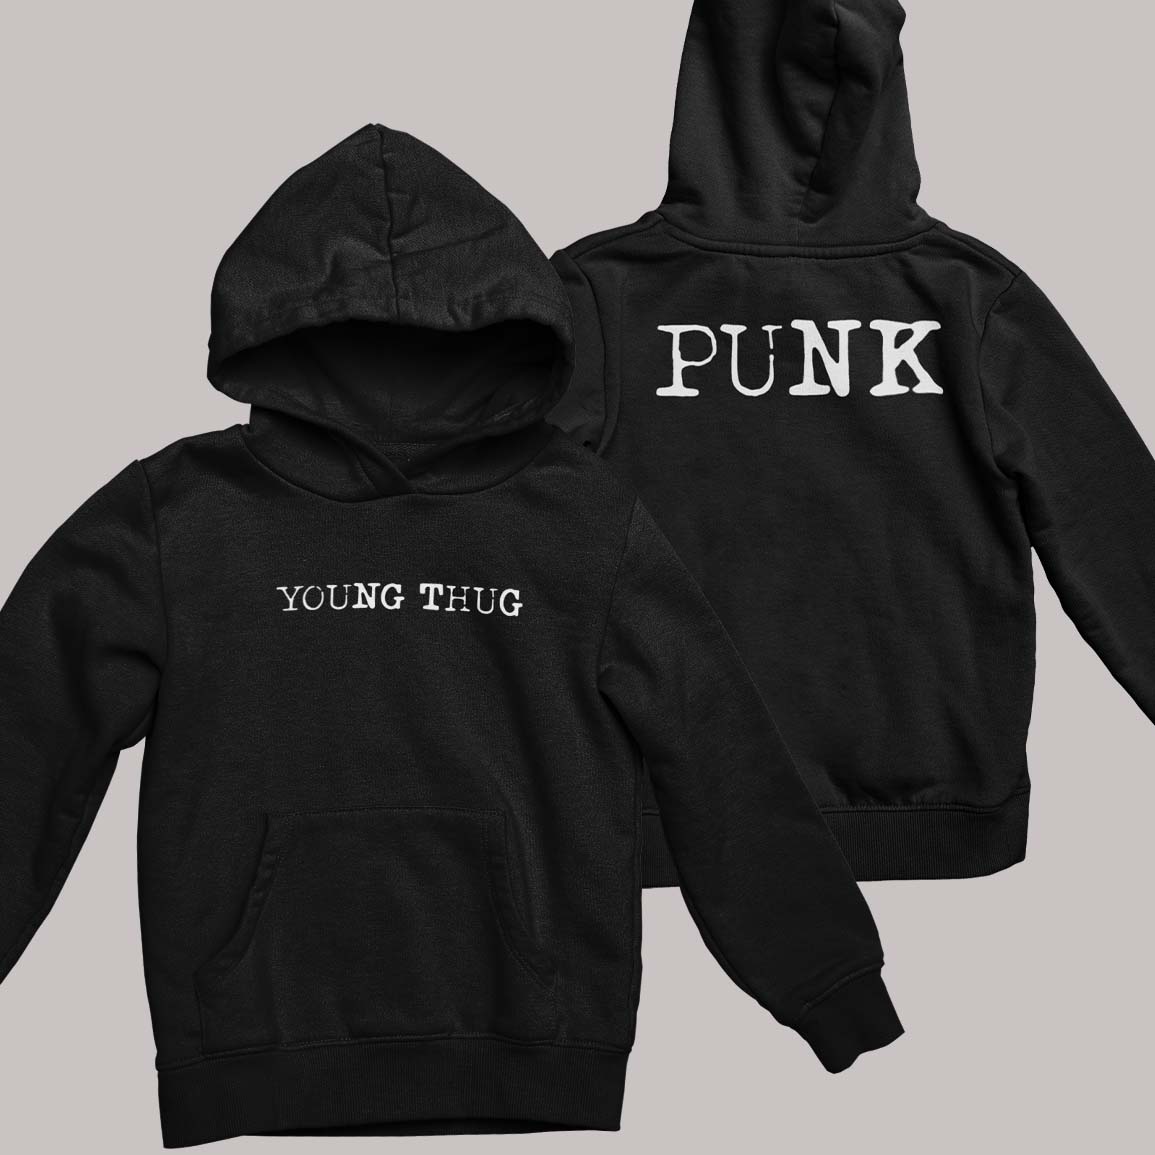 Young Thug Thuger Punk Hoodie